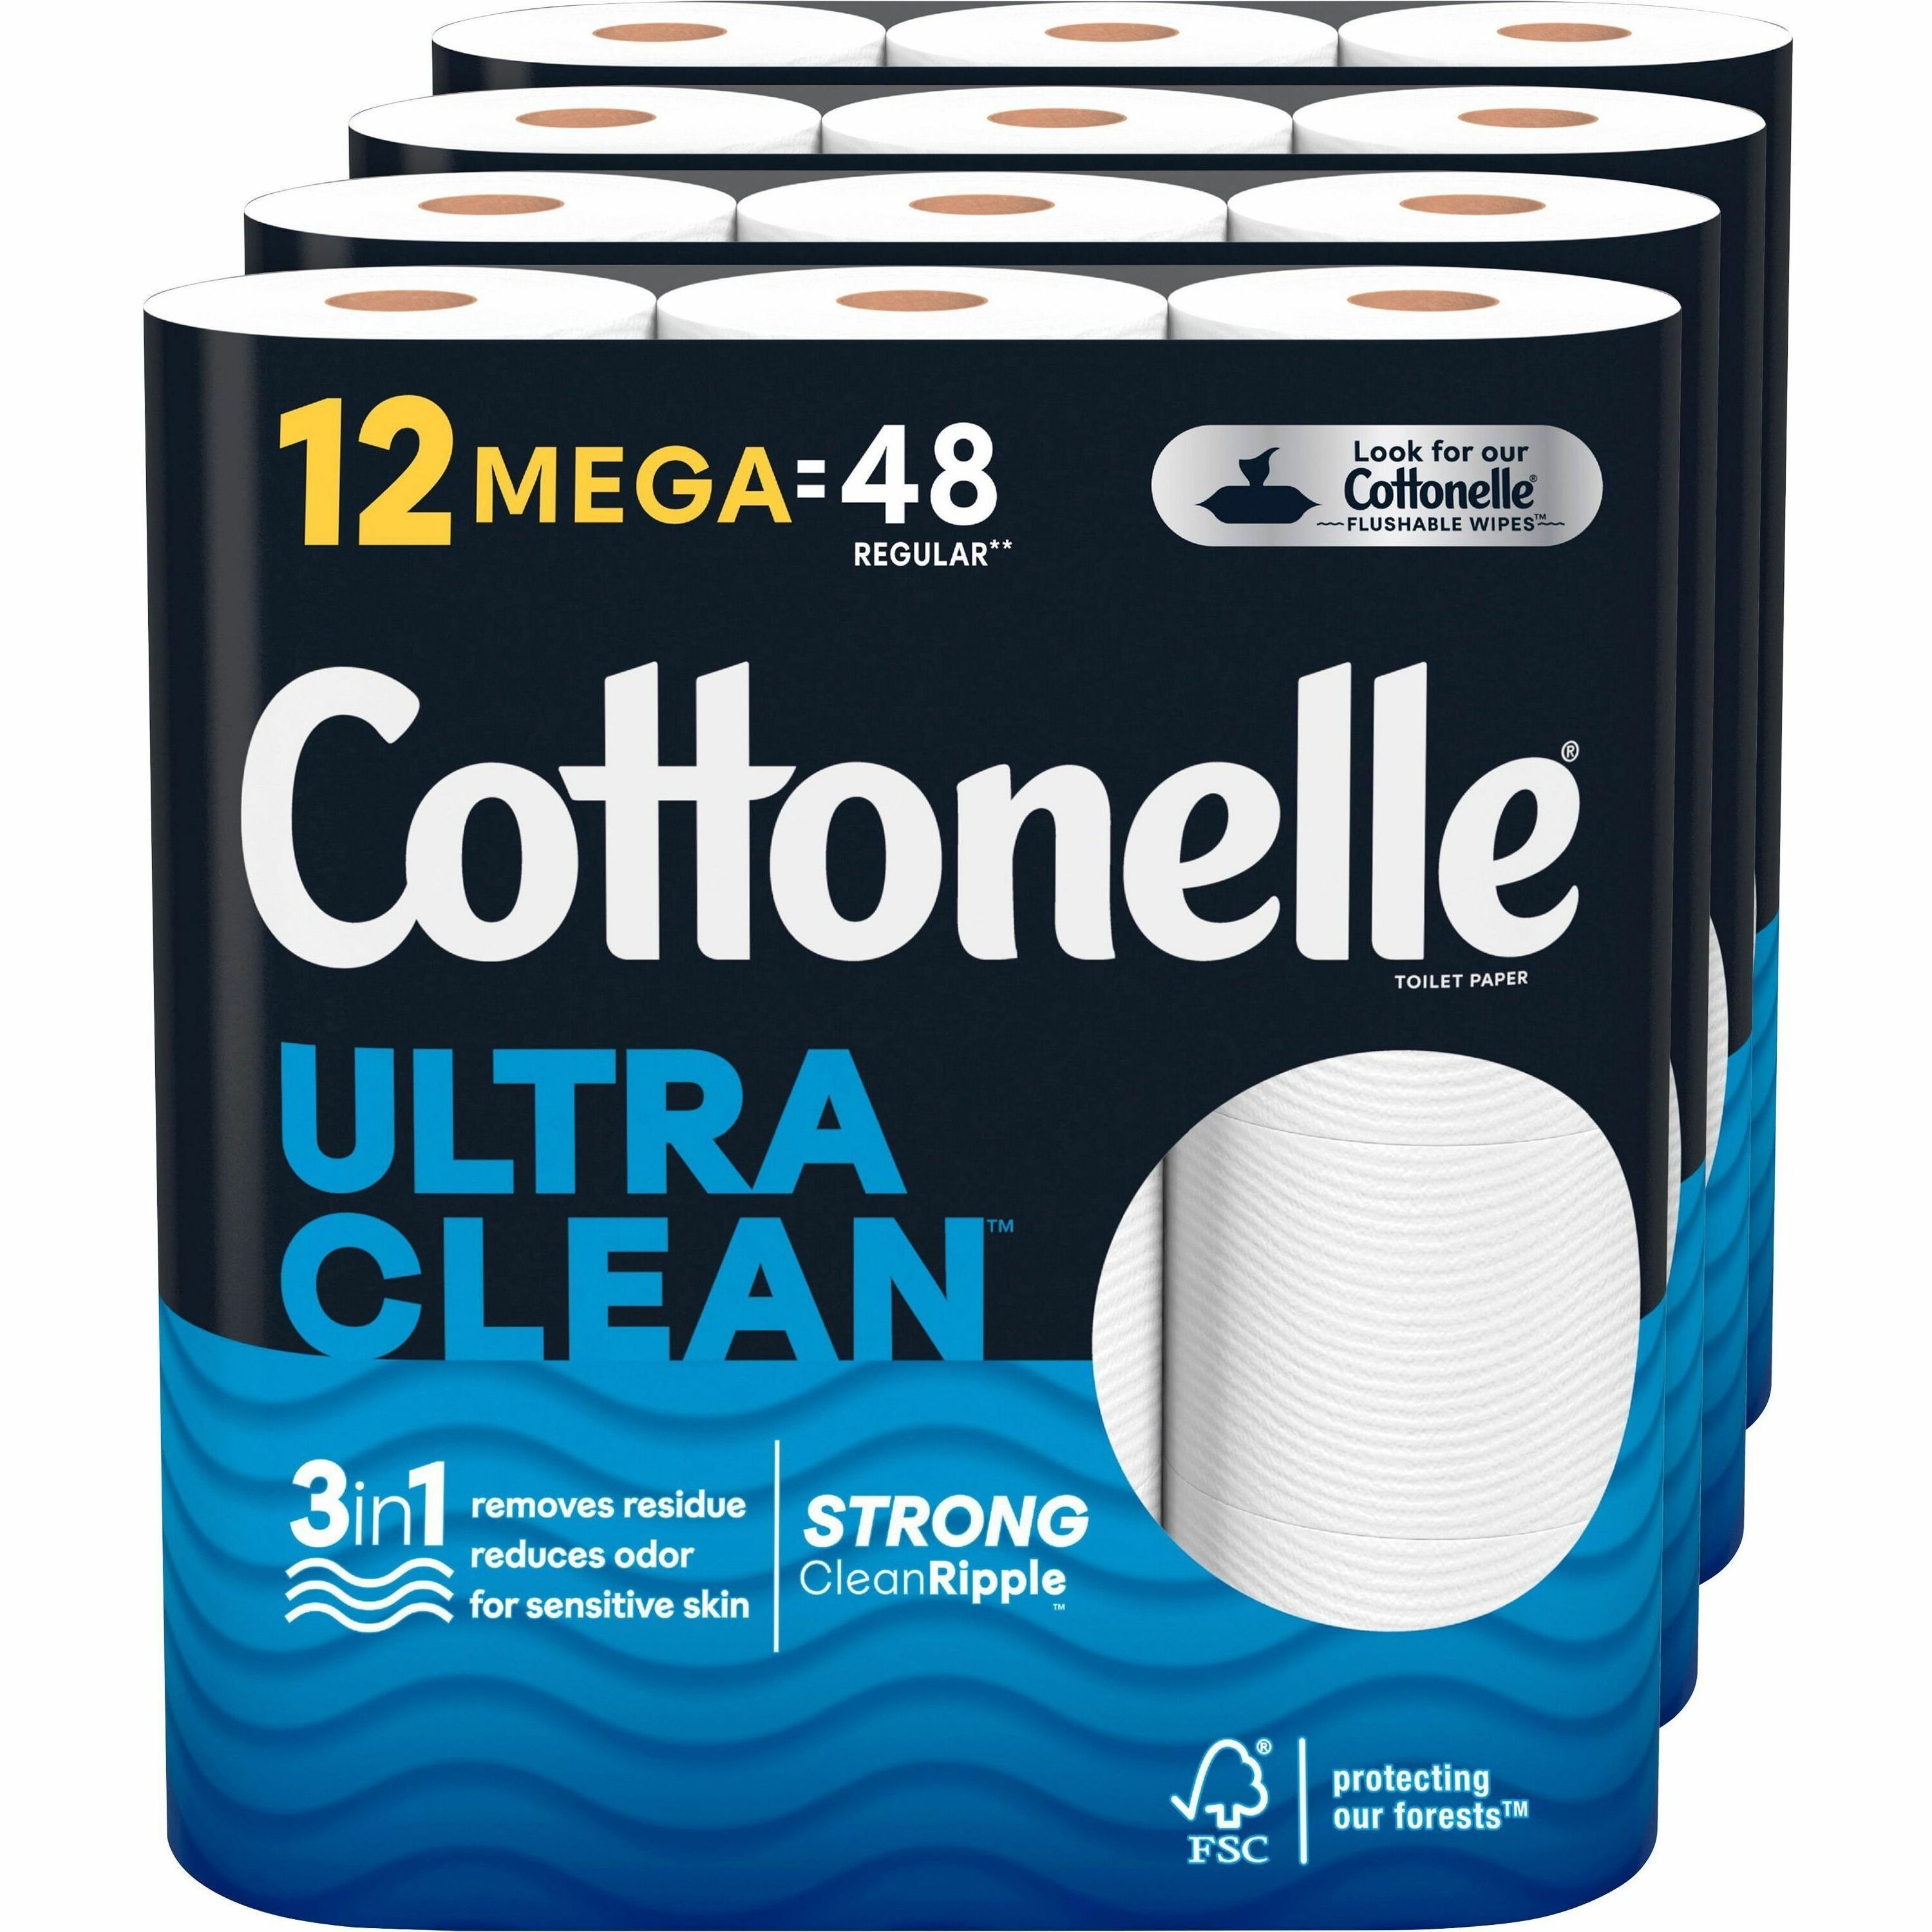 cottonelle-cleancare-bath-tissue-312-sheets-roll-white-fiber-strong-thick-soft-sewer-safe-septic-safe-flushable-clog-safe-hypoallergenic-biodegradable-textured-for-bathroom-toilet-12-rolls-per-pack-4-carton_kcc54151ct - 1